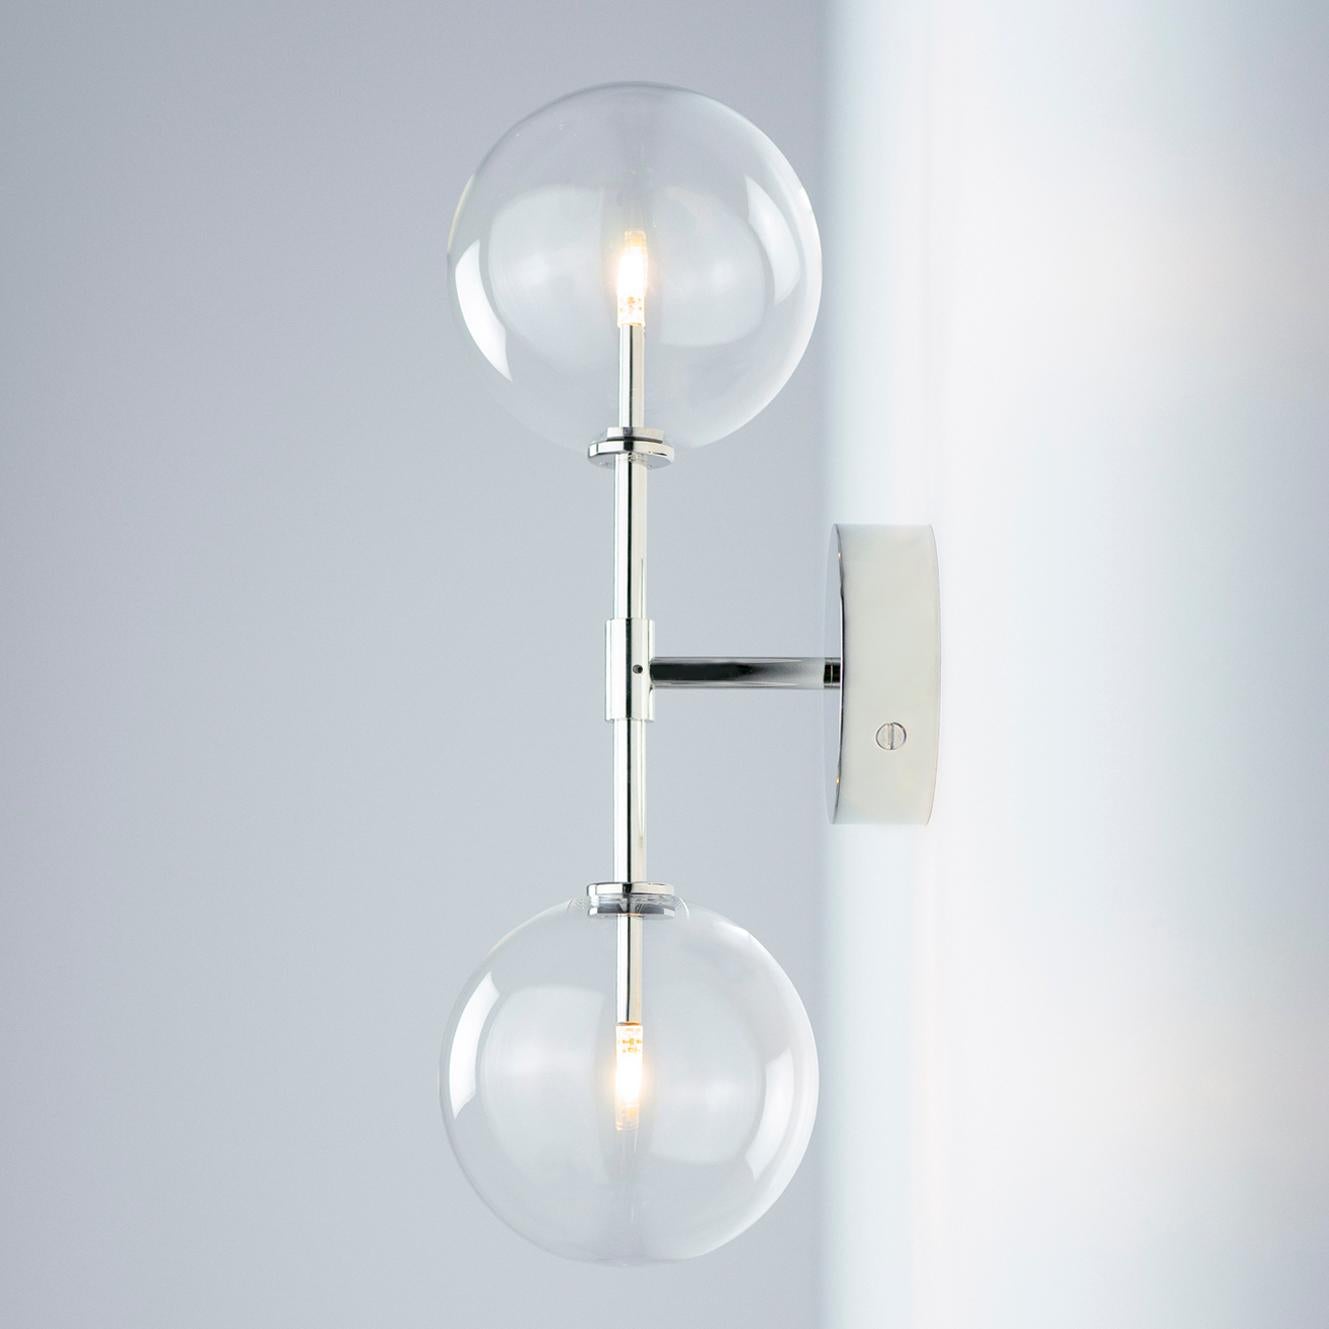 Dawn Dual Wall Sconce by Schwung
Dimensions: W 19 x D 15 x H 47.8 cm
Materials: Polished Nickel, hand blown glass globes

Finishes available: Black gunmetal, polished nickel and brass
Other sizes available.

Schwung is a German word, and